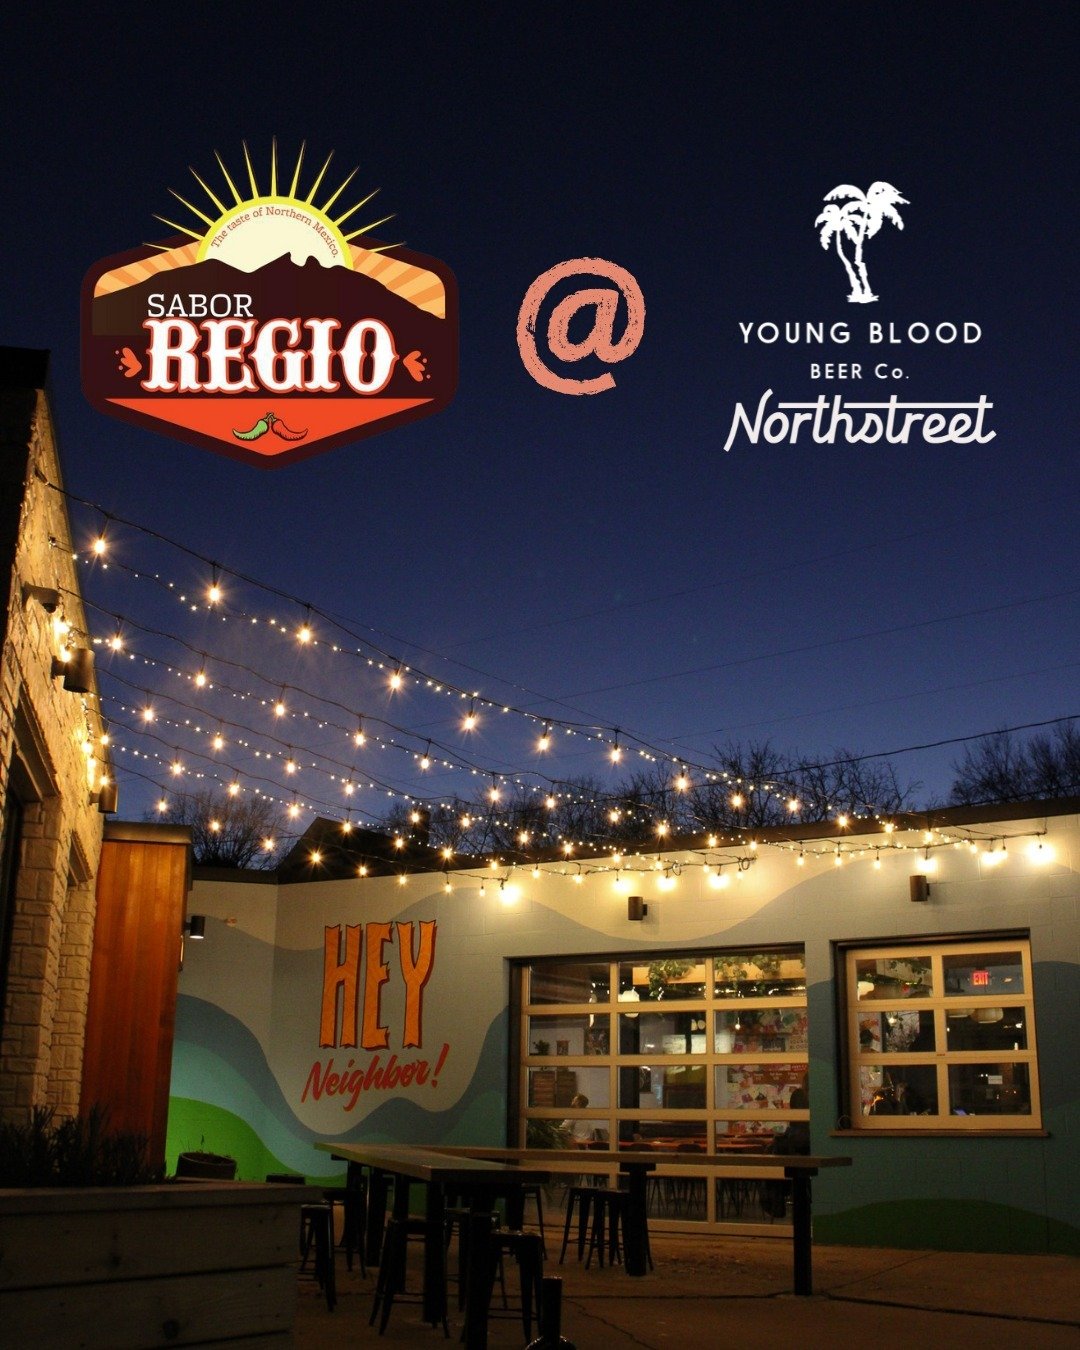 Tacos and beer... Yes, please!

We have a new food truck heading to @northstreetmsn this month! 🌮

Sabor Regio Food Truck will be heading to Eken Park!

Sabor Regio is an authentic Northern Mexican food truck that will be hanging out with us every S